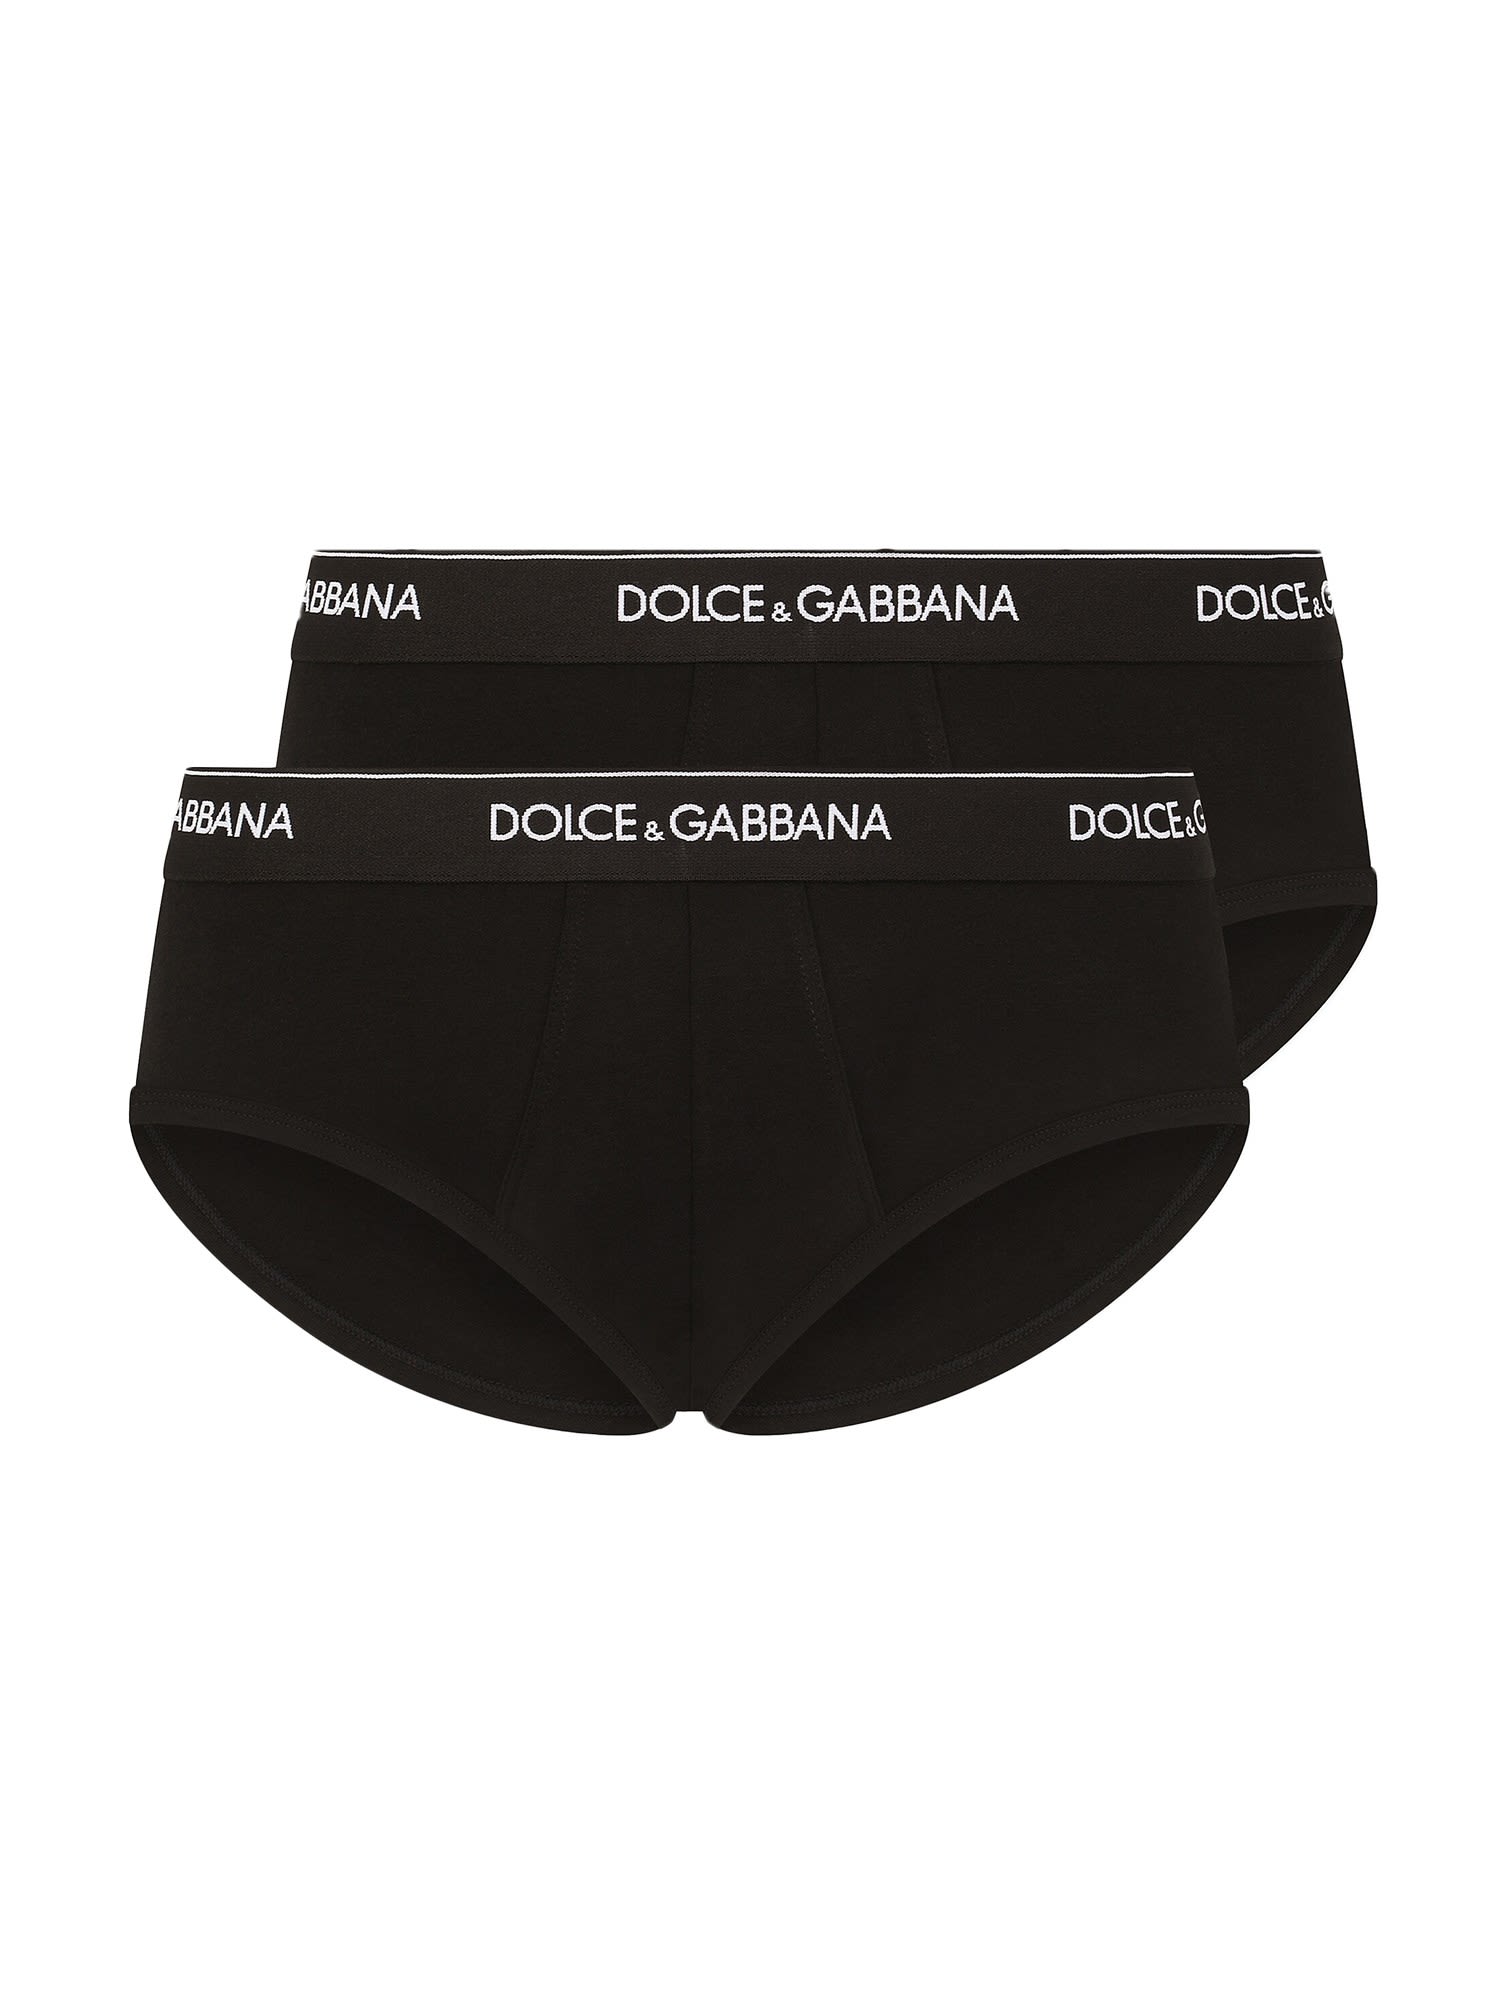 DOLCE & GABBANA TWO-PACK OF BRIEFS